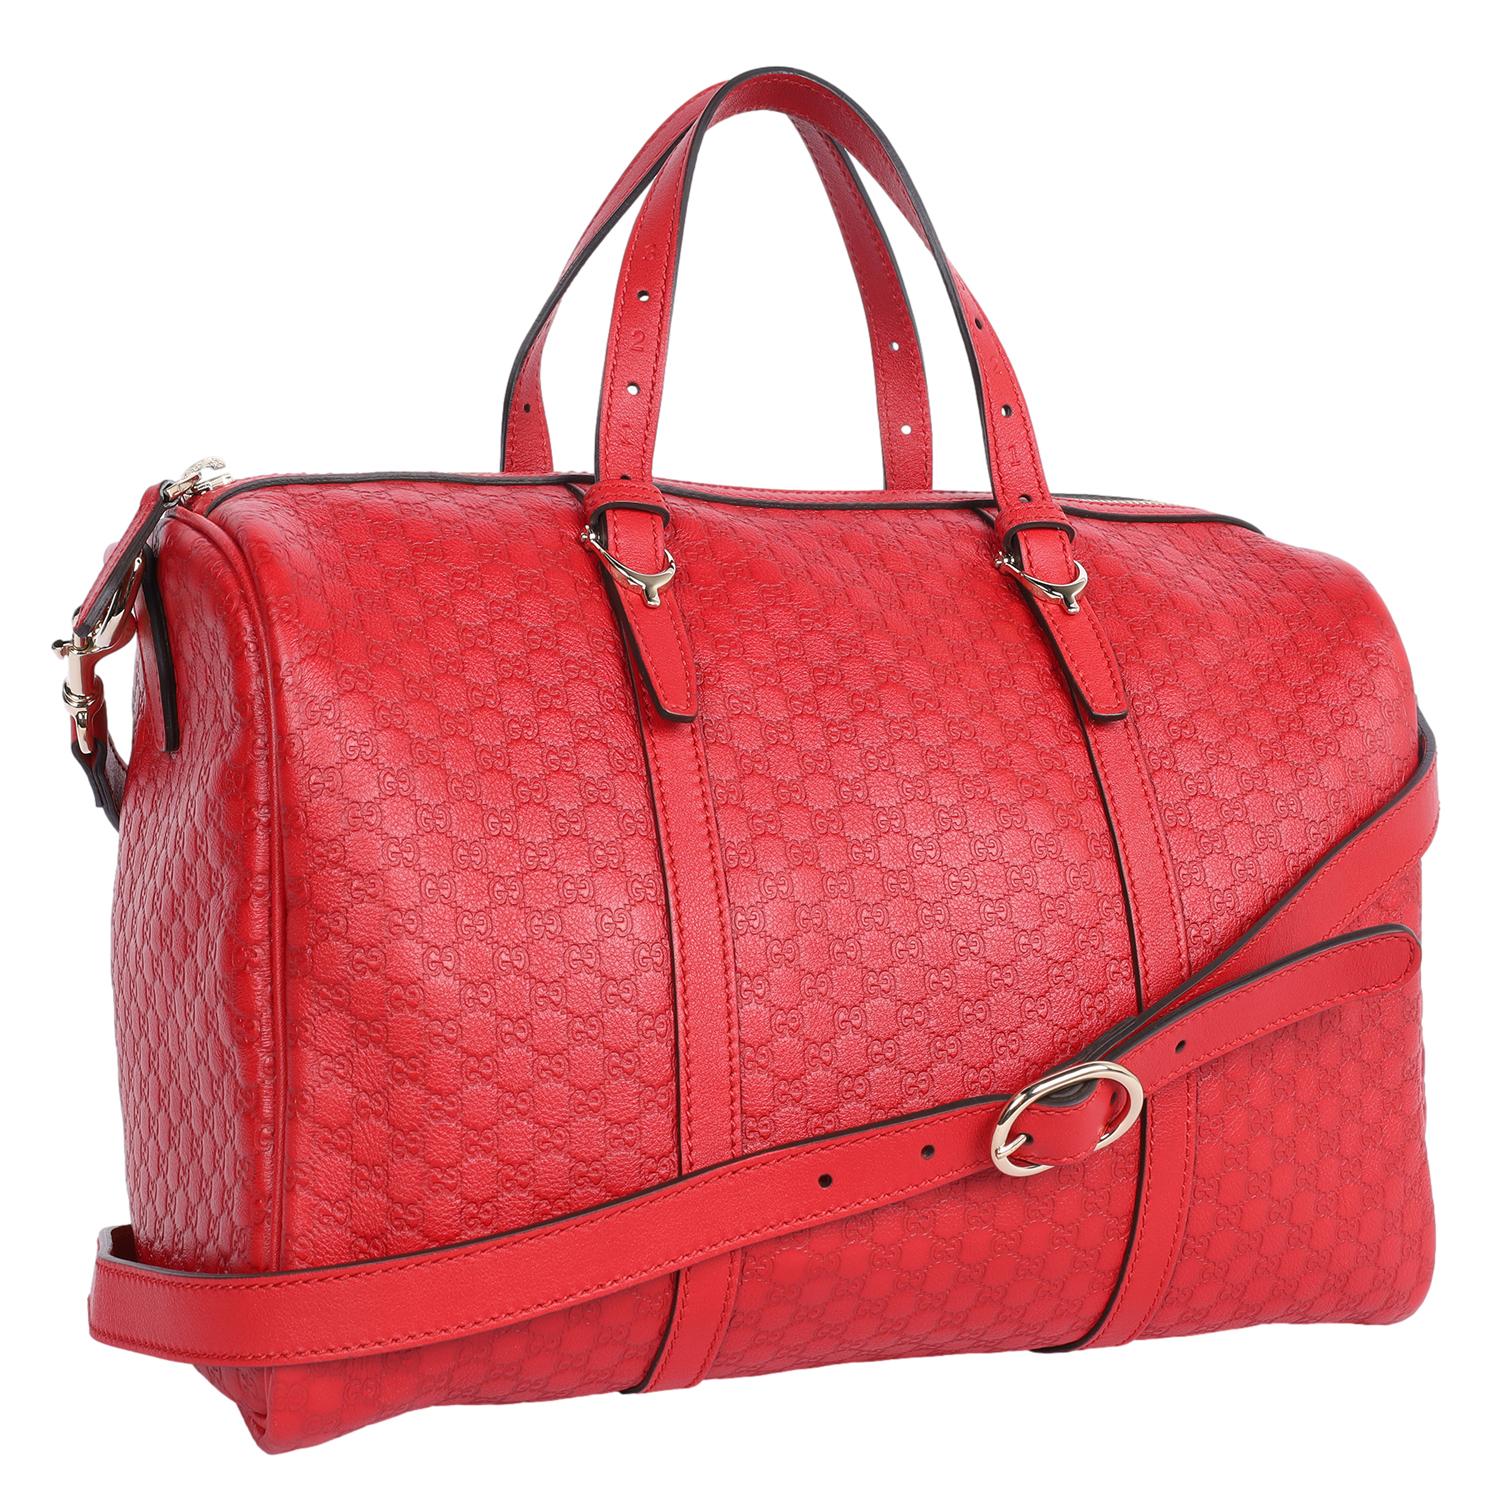 Authentic, pre-loved Gucci GG Guccissima Medium Joy Signature Bag in Red. This stylish bag features Gucci monogram embossed Guccissima leather in red. The bag features rolled leather top handles, an optional shoulder strap, gold hardware, zipper top